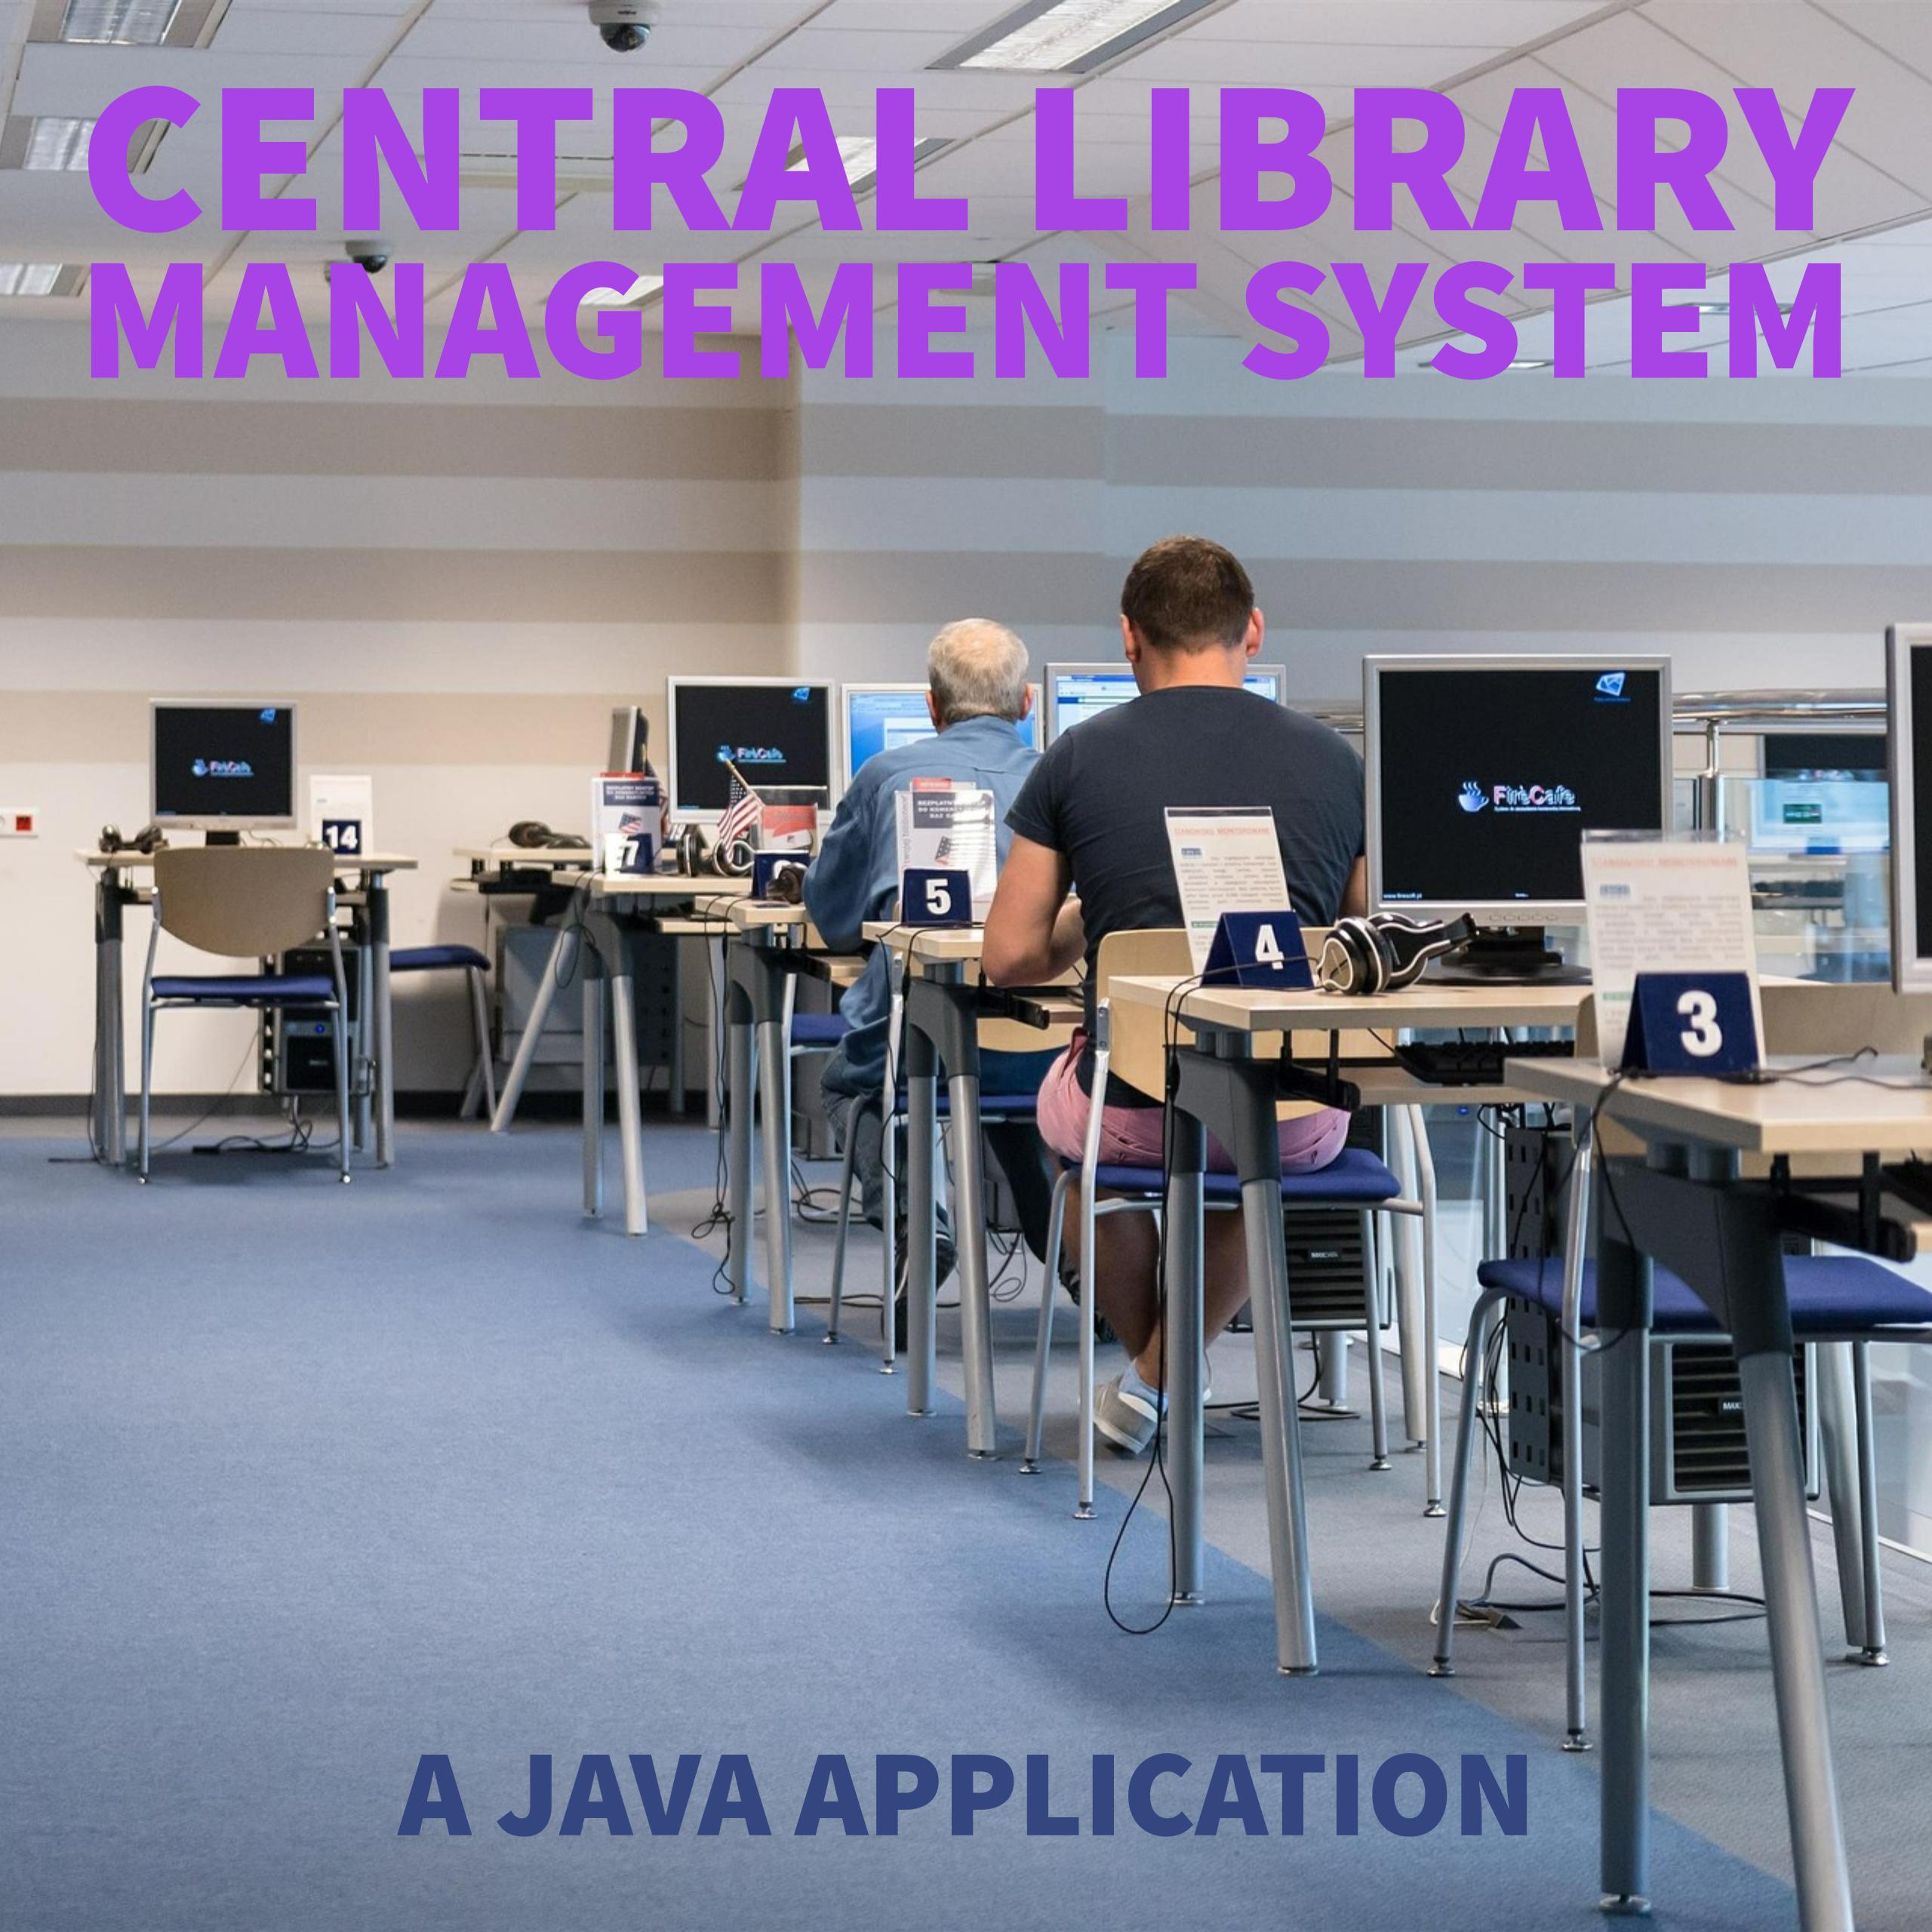 Central Library Management System